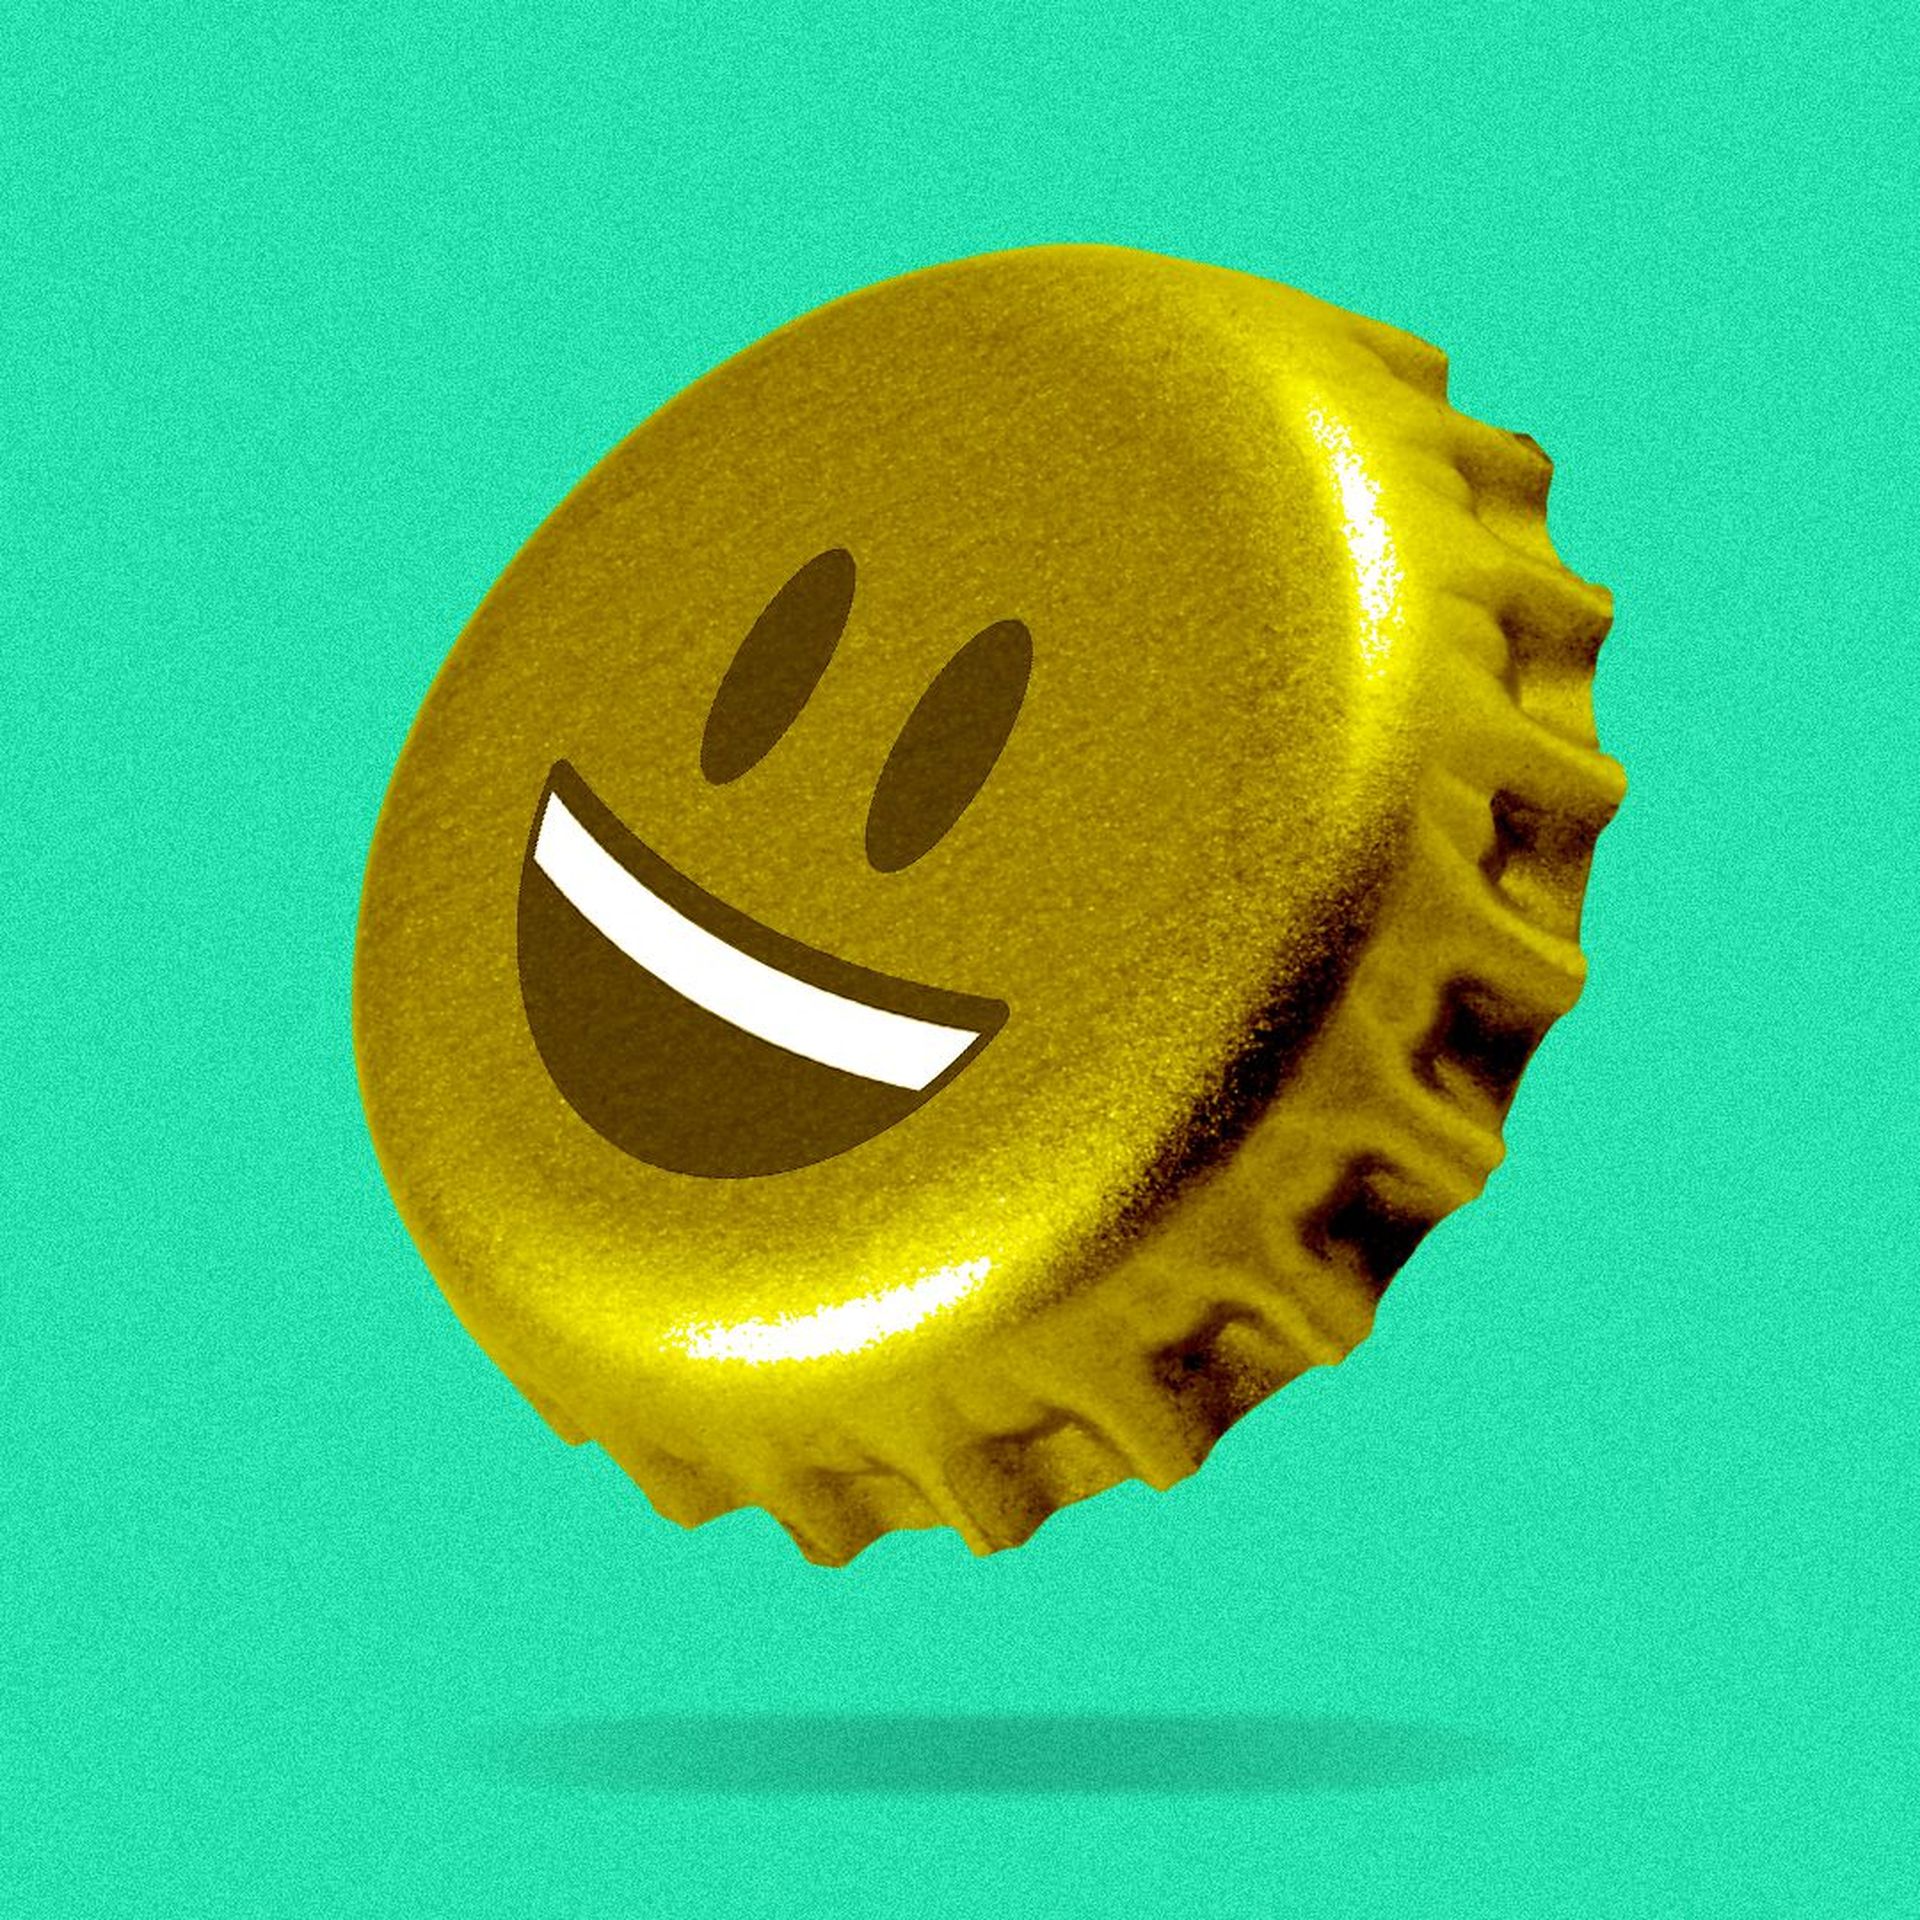 Illustration of a beer bottle cap with a grinning emoji face on it.